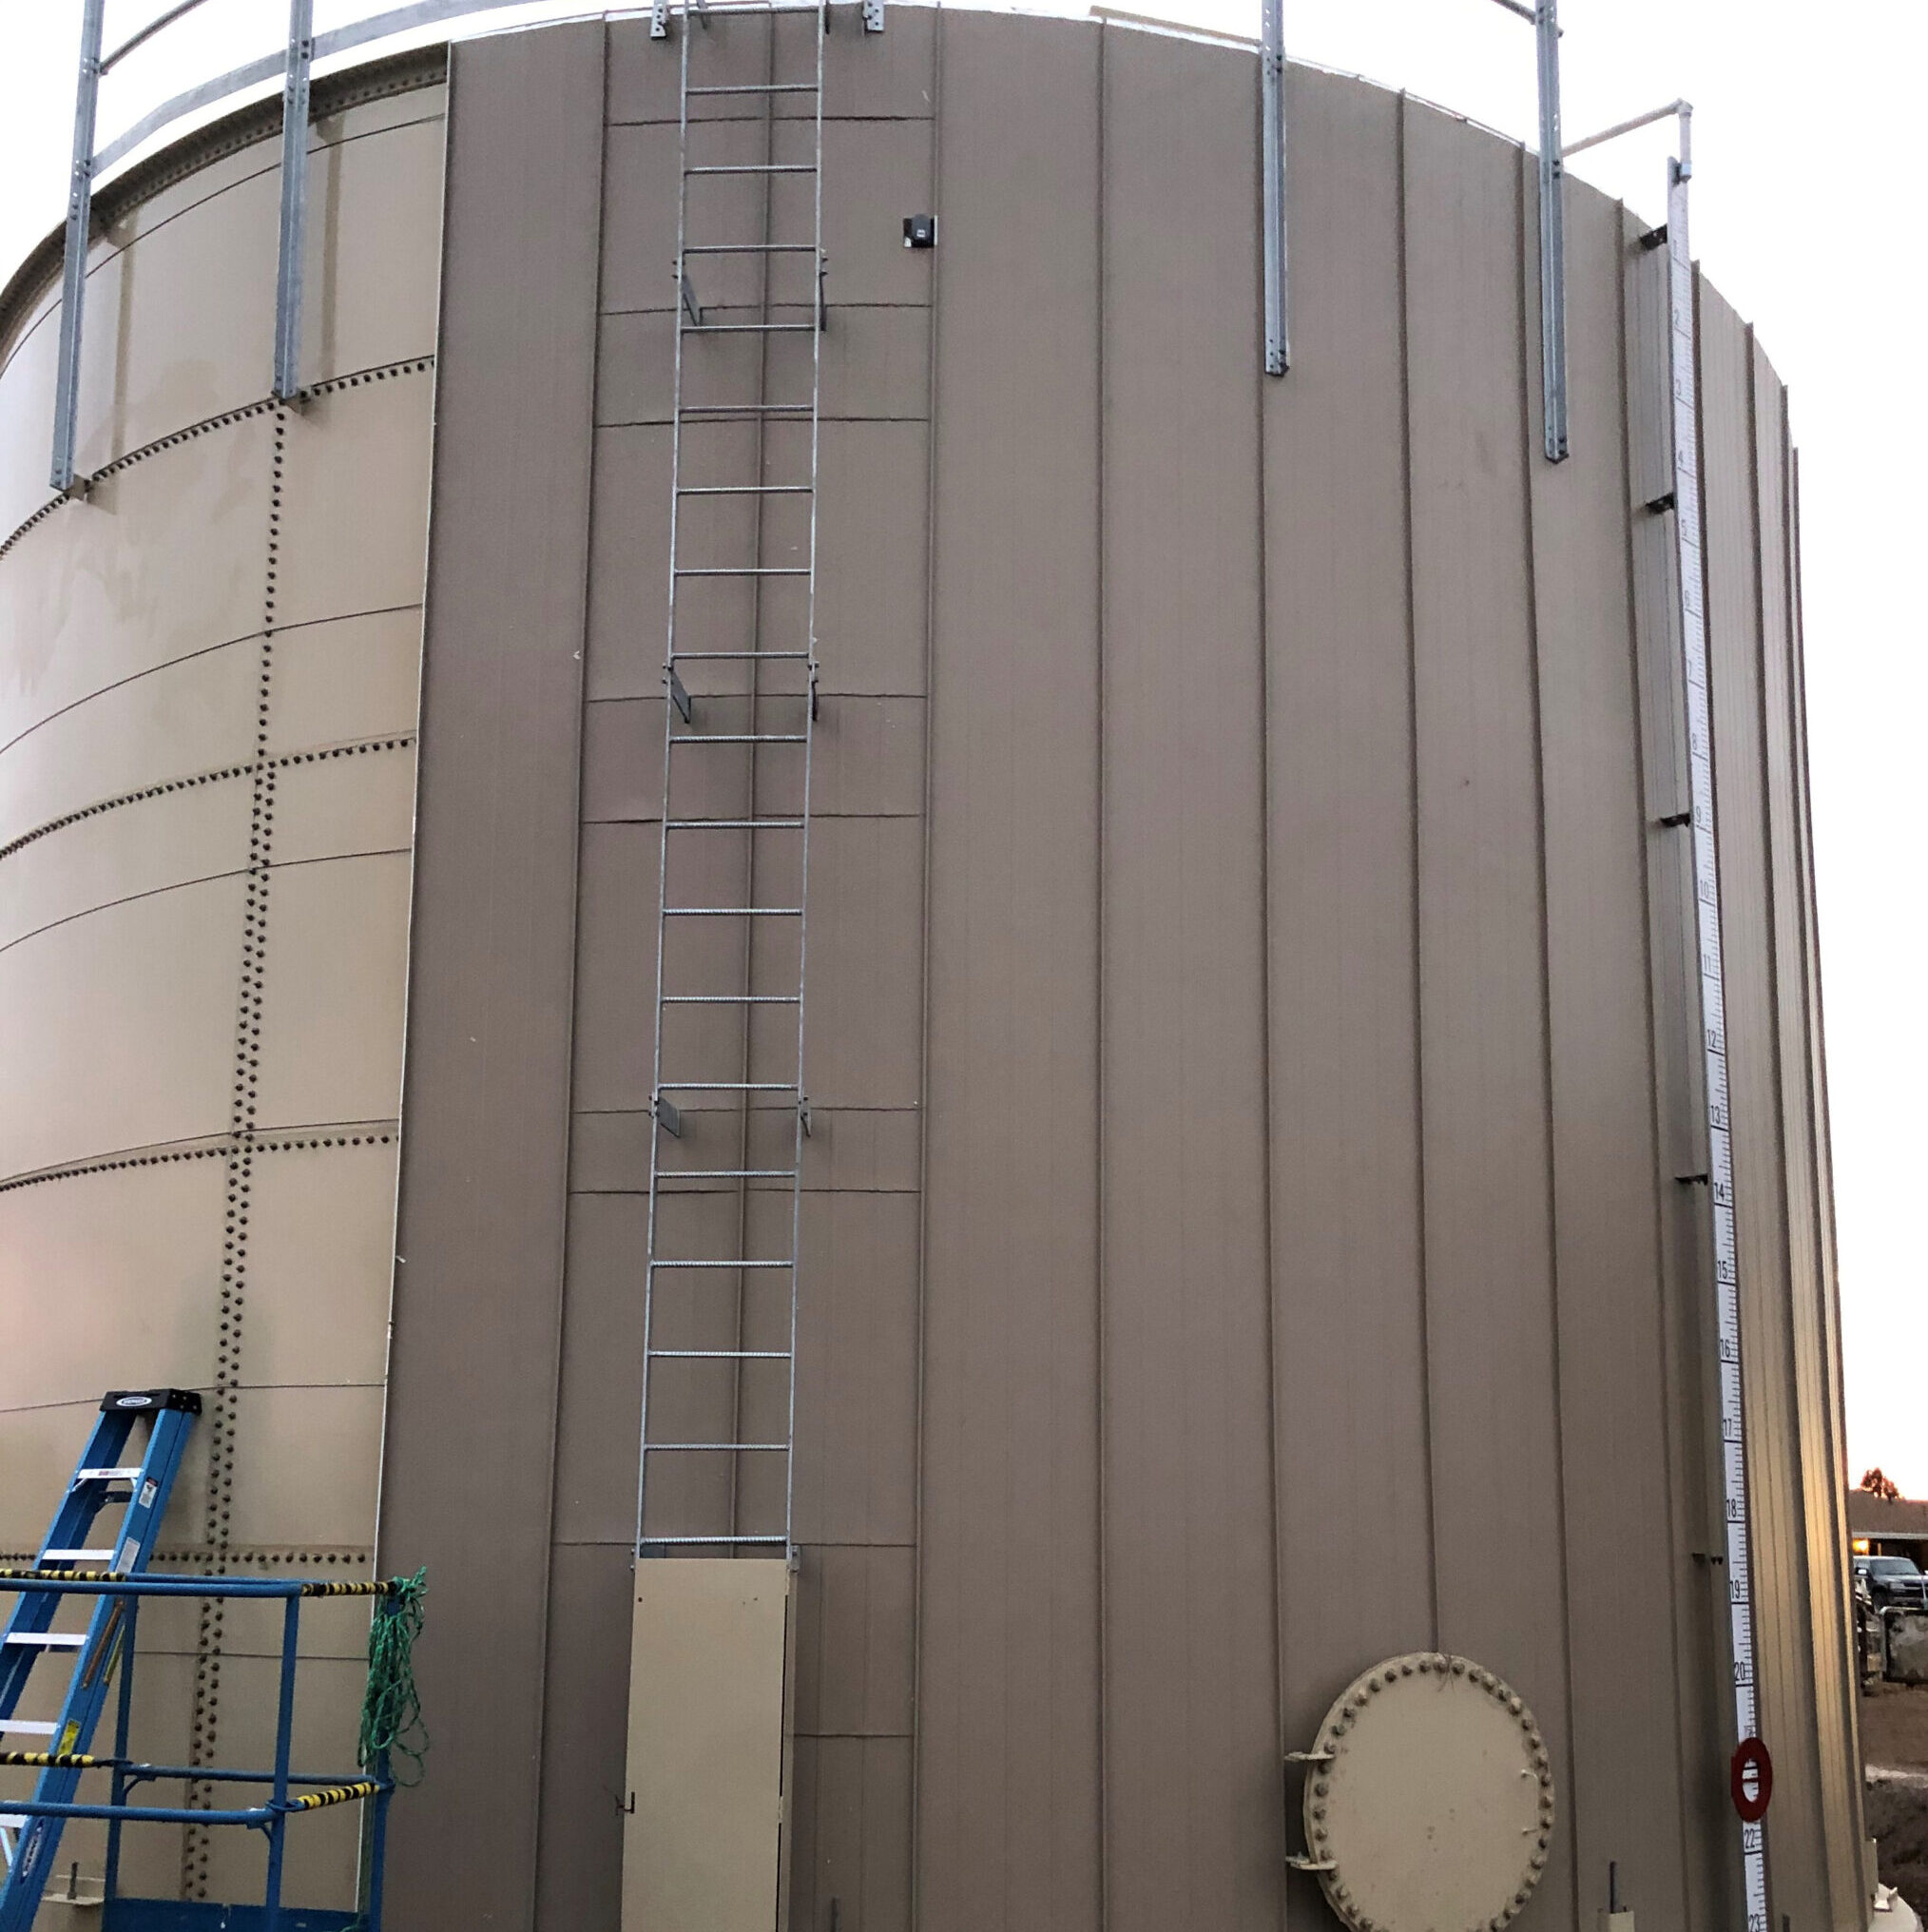 Beige water storage tank with vertical insulation being installed on outside